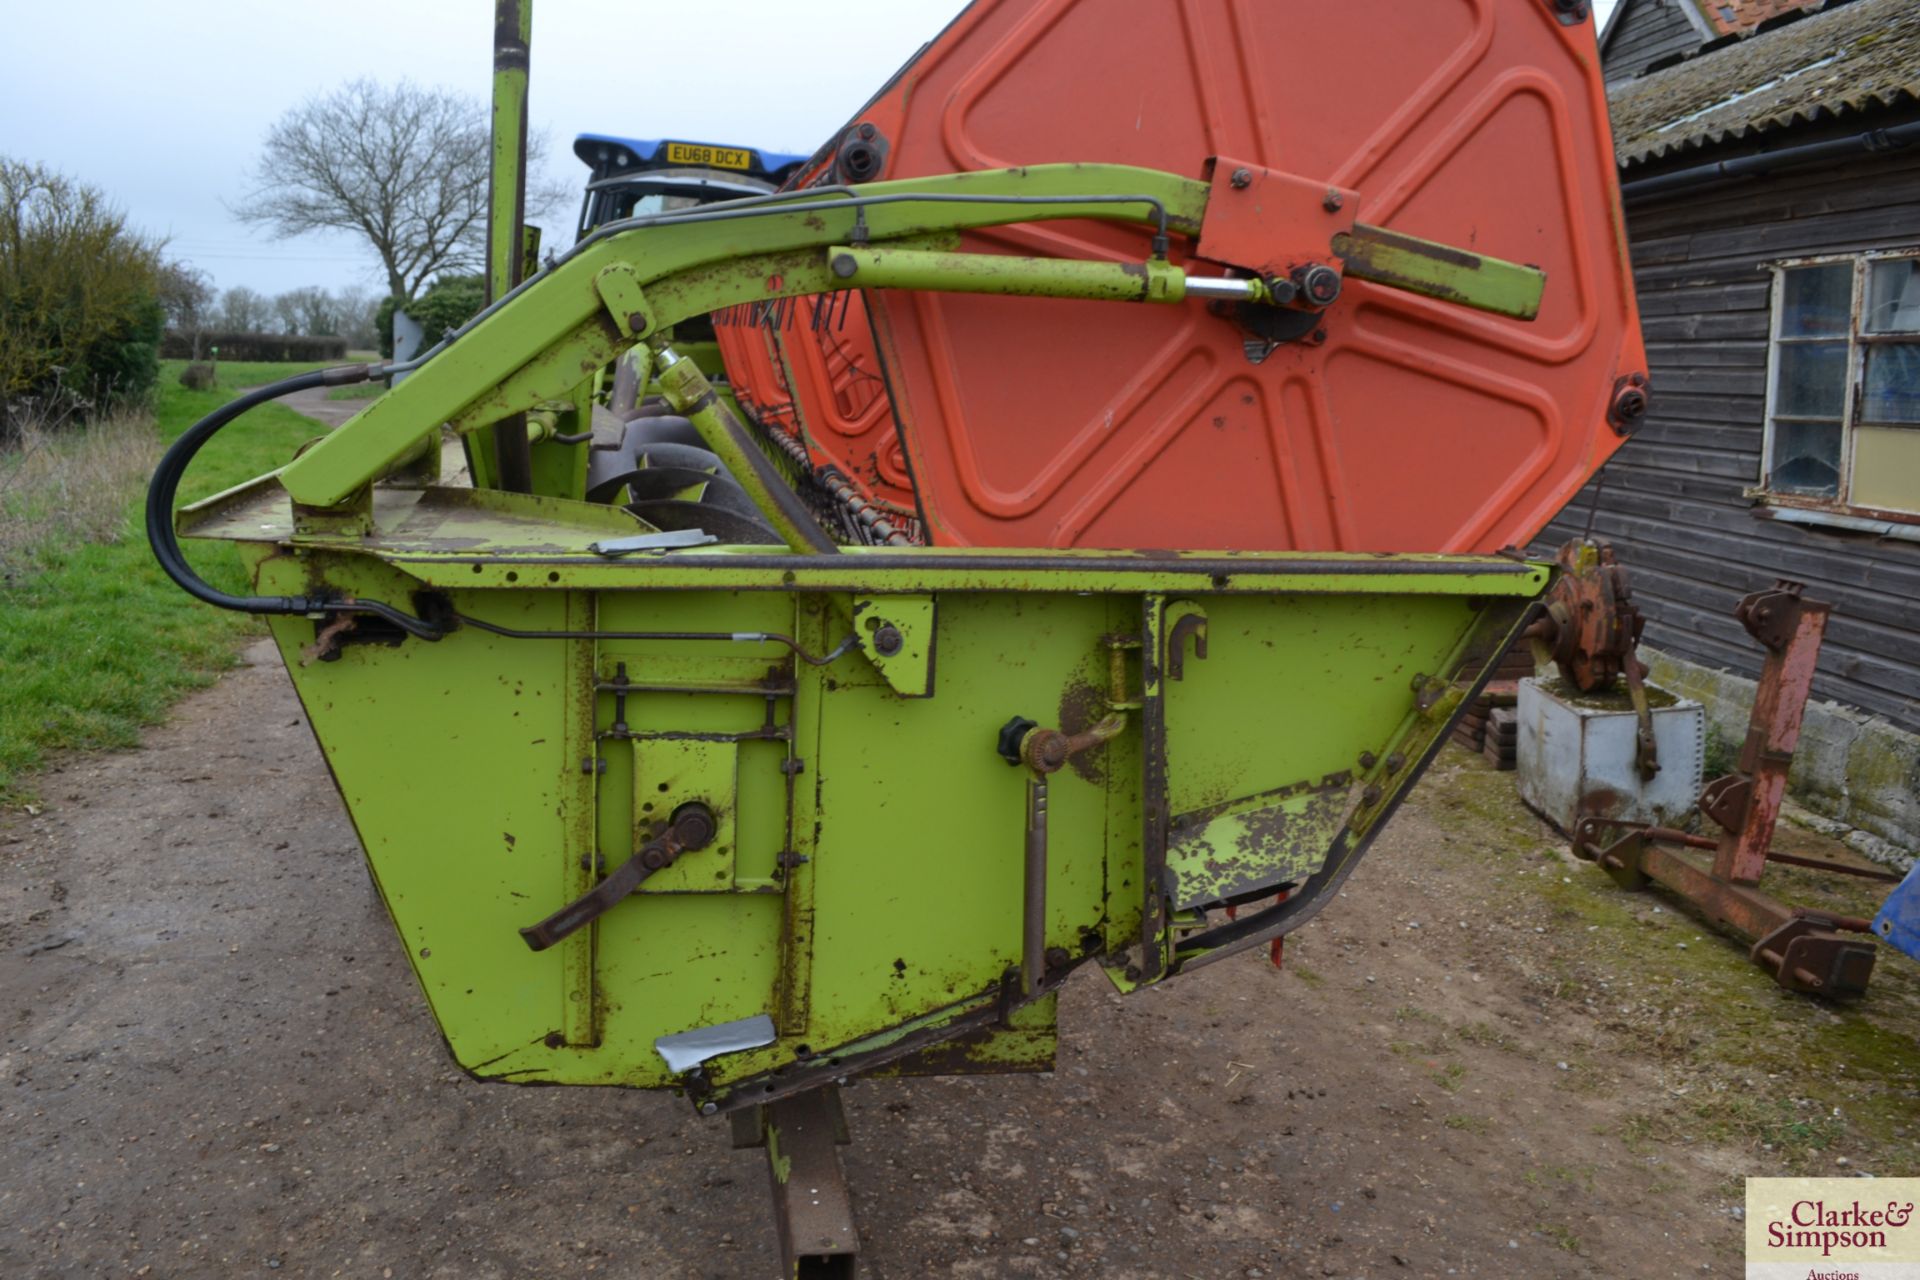 ** UPDATED HOURS ** Claas Dominator 98S combine. Registration E799 APU. Date of first registration - Image 99 of 120